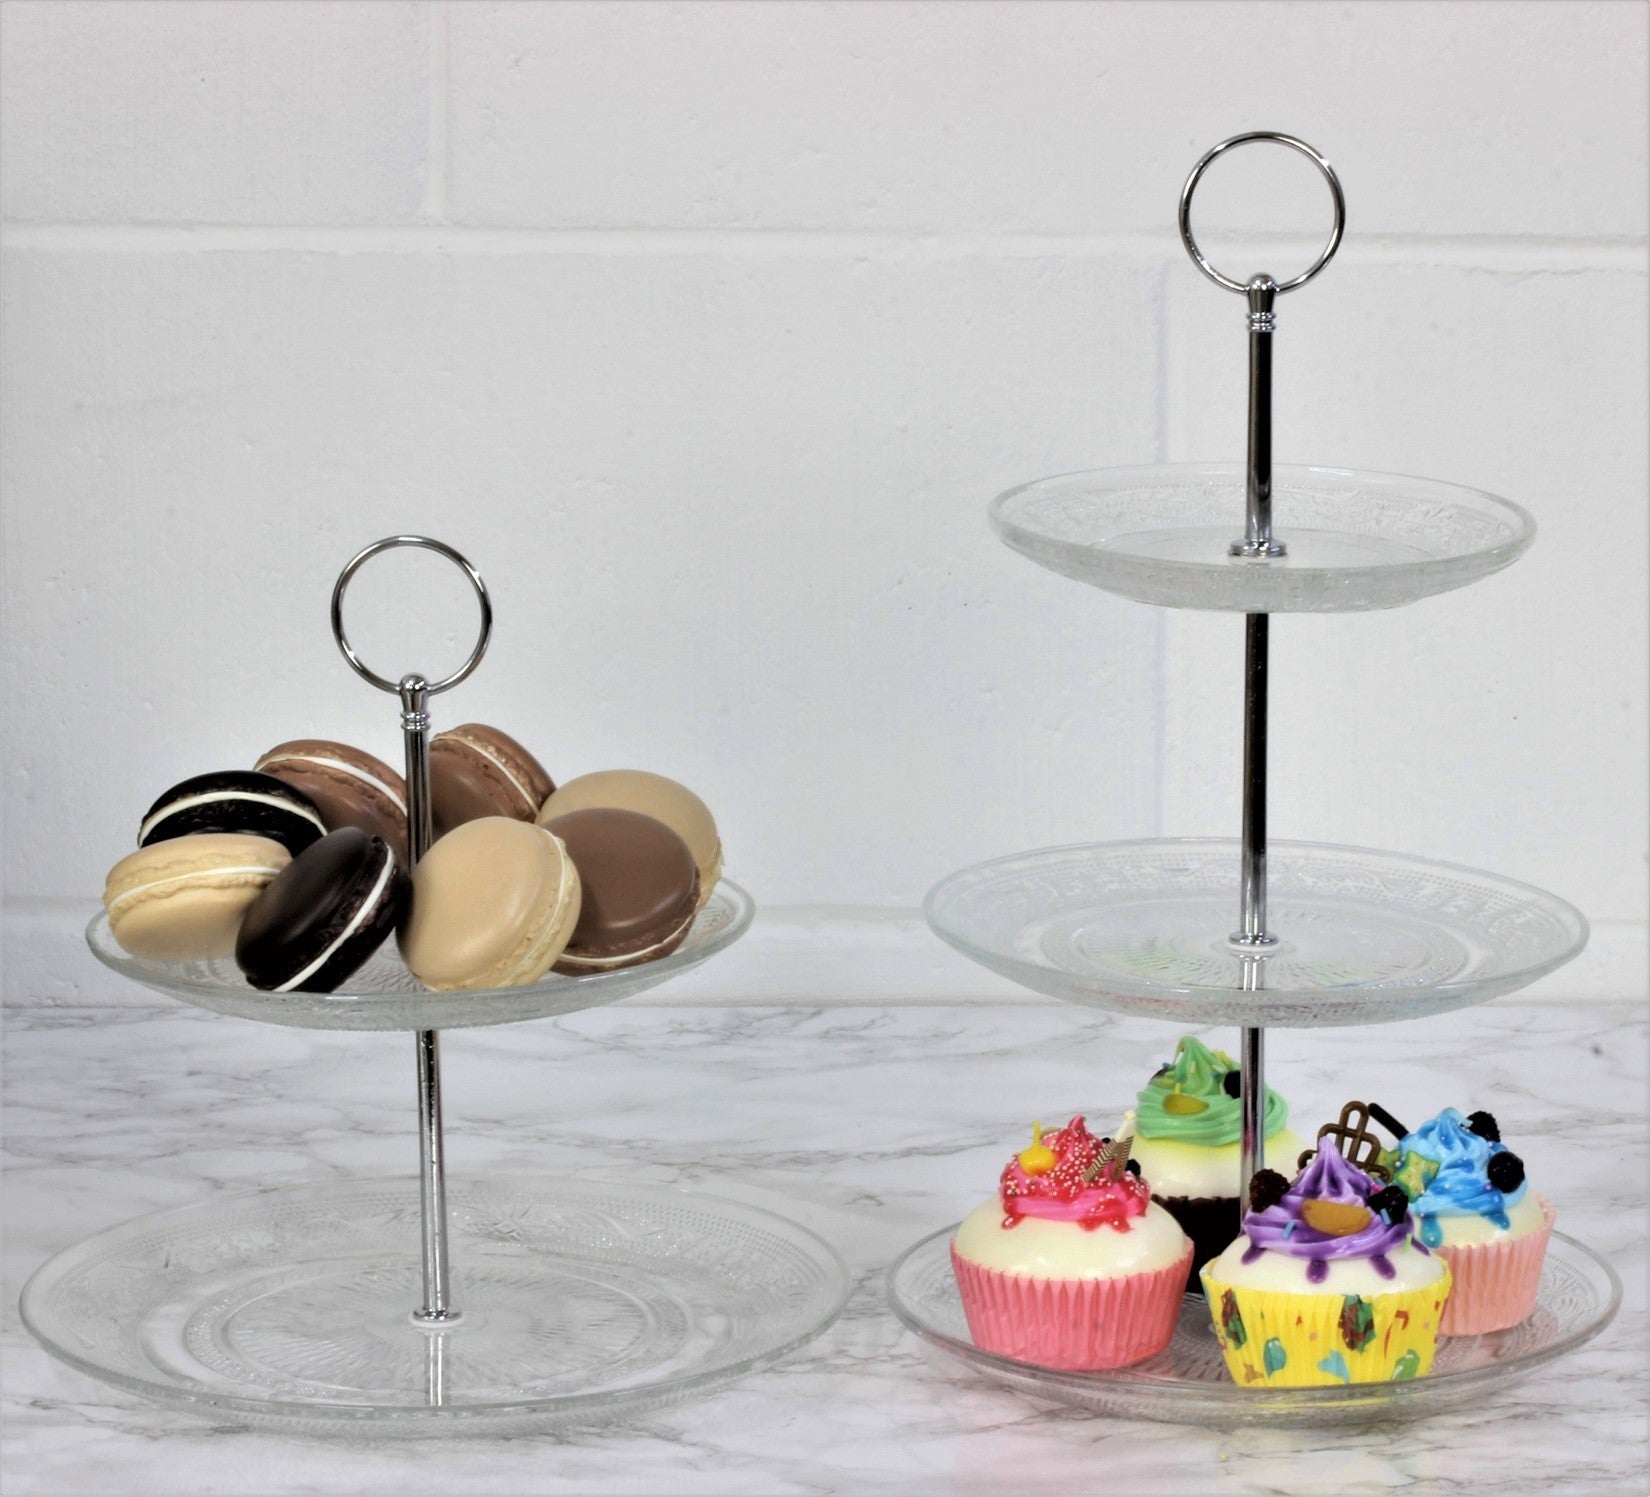 Set of 2 3-Tier Round Clear Glass Cake Stand